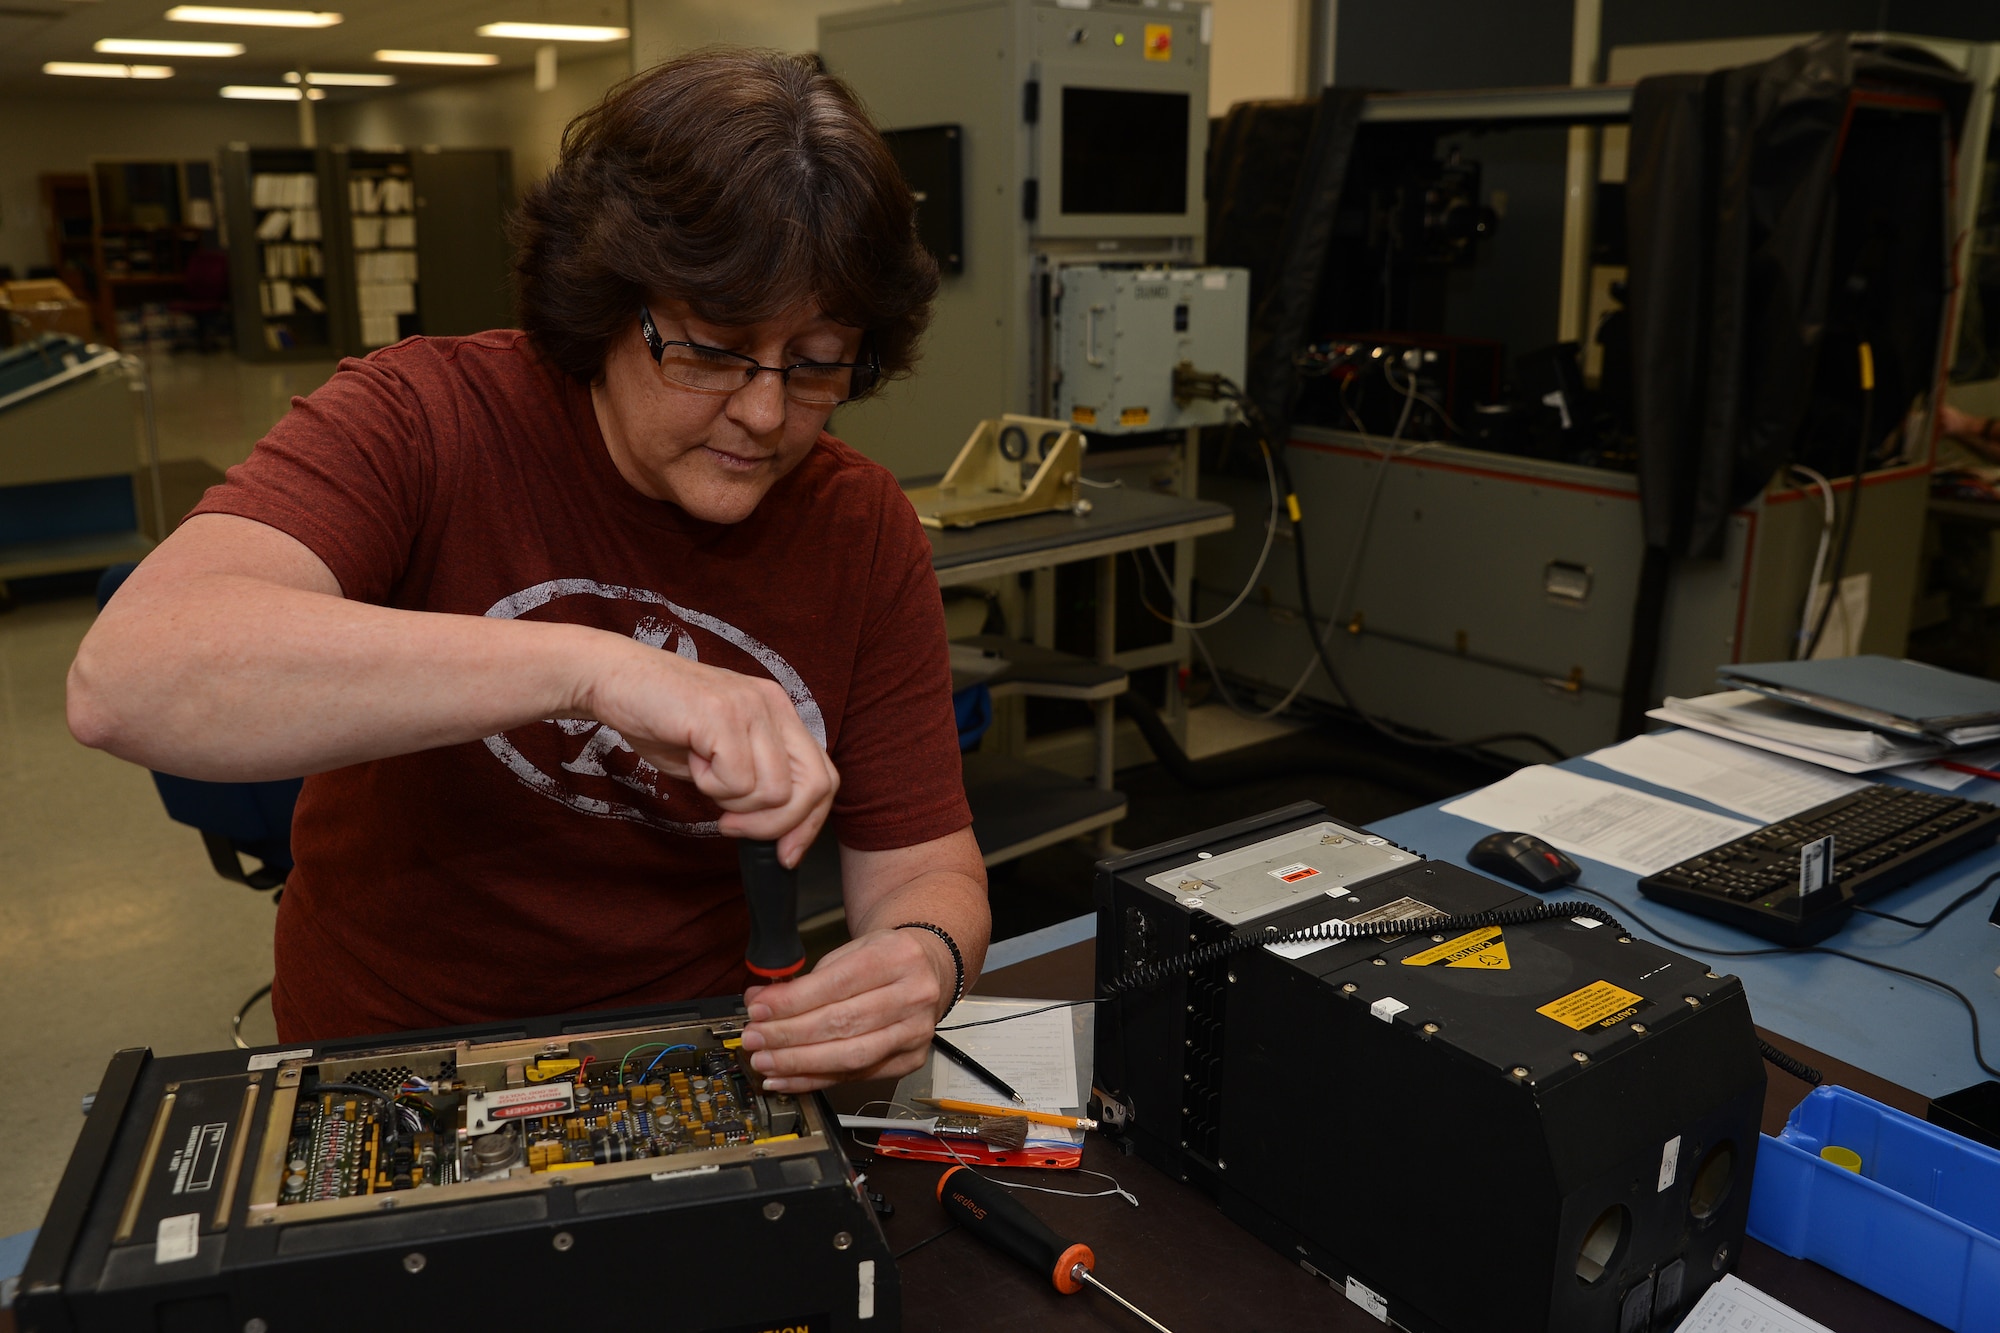 Carla De Ruysscher, 62nd Maintenance Squadron avionics technician, takes apart a C-17 multi-function display unit May 24, 2016, at Joint Base Lewis-McChord, Wash. Valued at $192,000, each C-17 multi-function display unit refurbished by the flight results in savings for the Air Force and provides a surplus of replacement assets for the Air Force’s C-17 fleet. (U.S. Air Force photo/ Senior Airman Jacob Jimenez) 